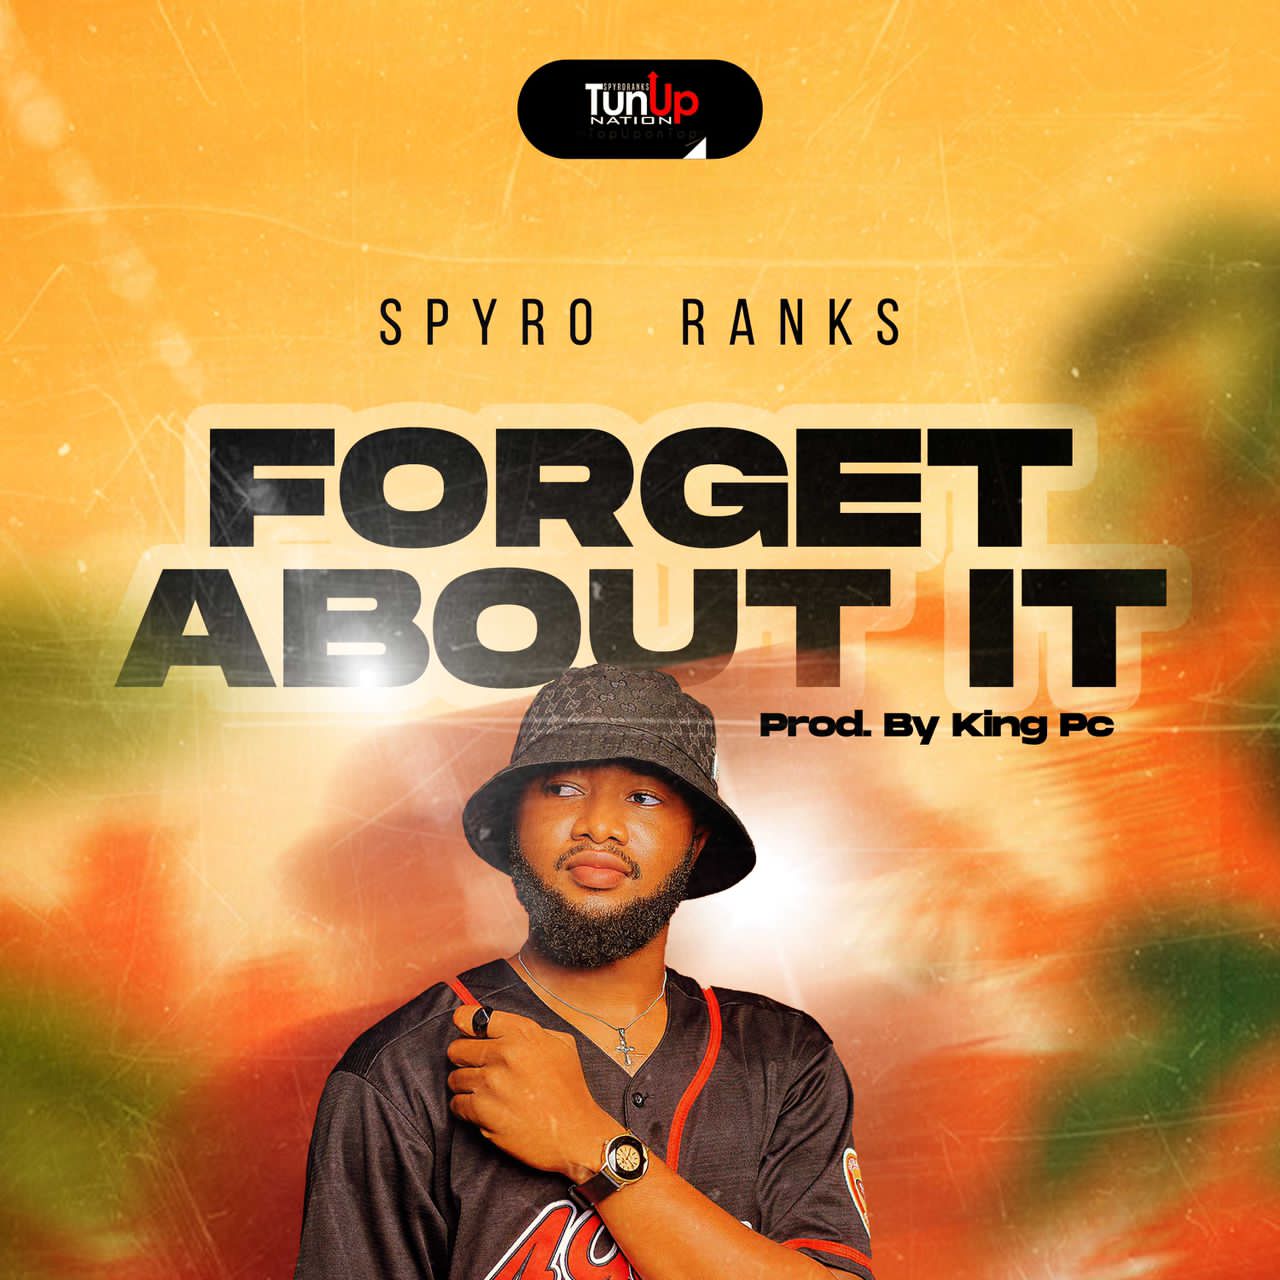 Download Mp3: Spyro Ranks _ Forget about it (Prod by King Pc)